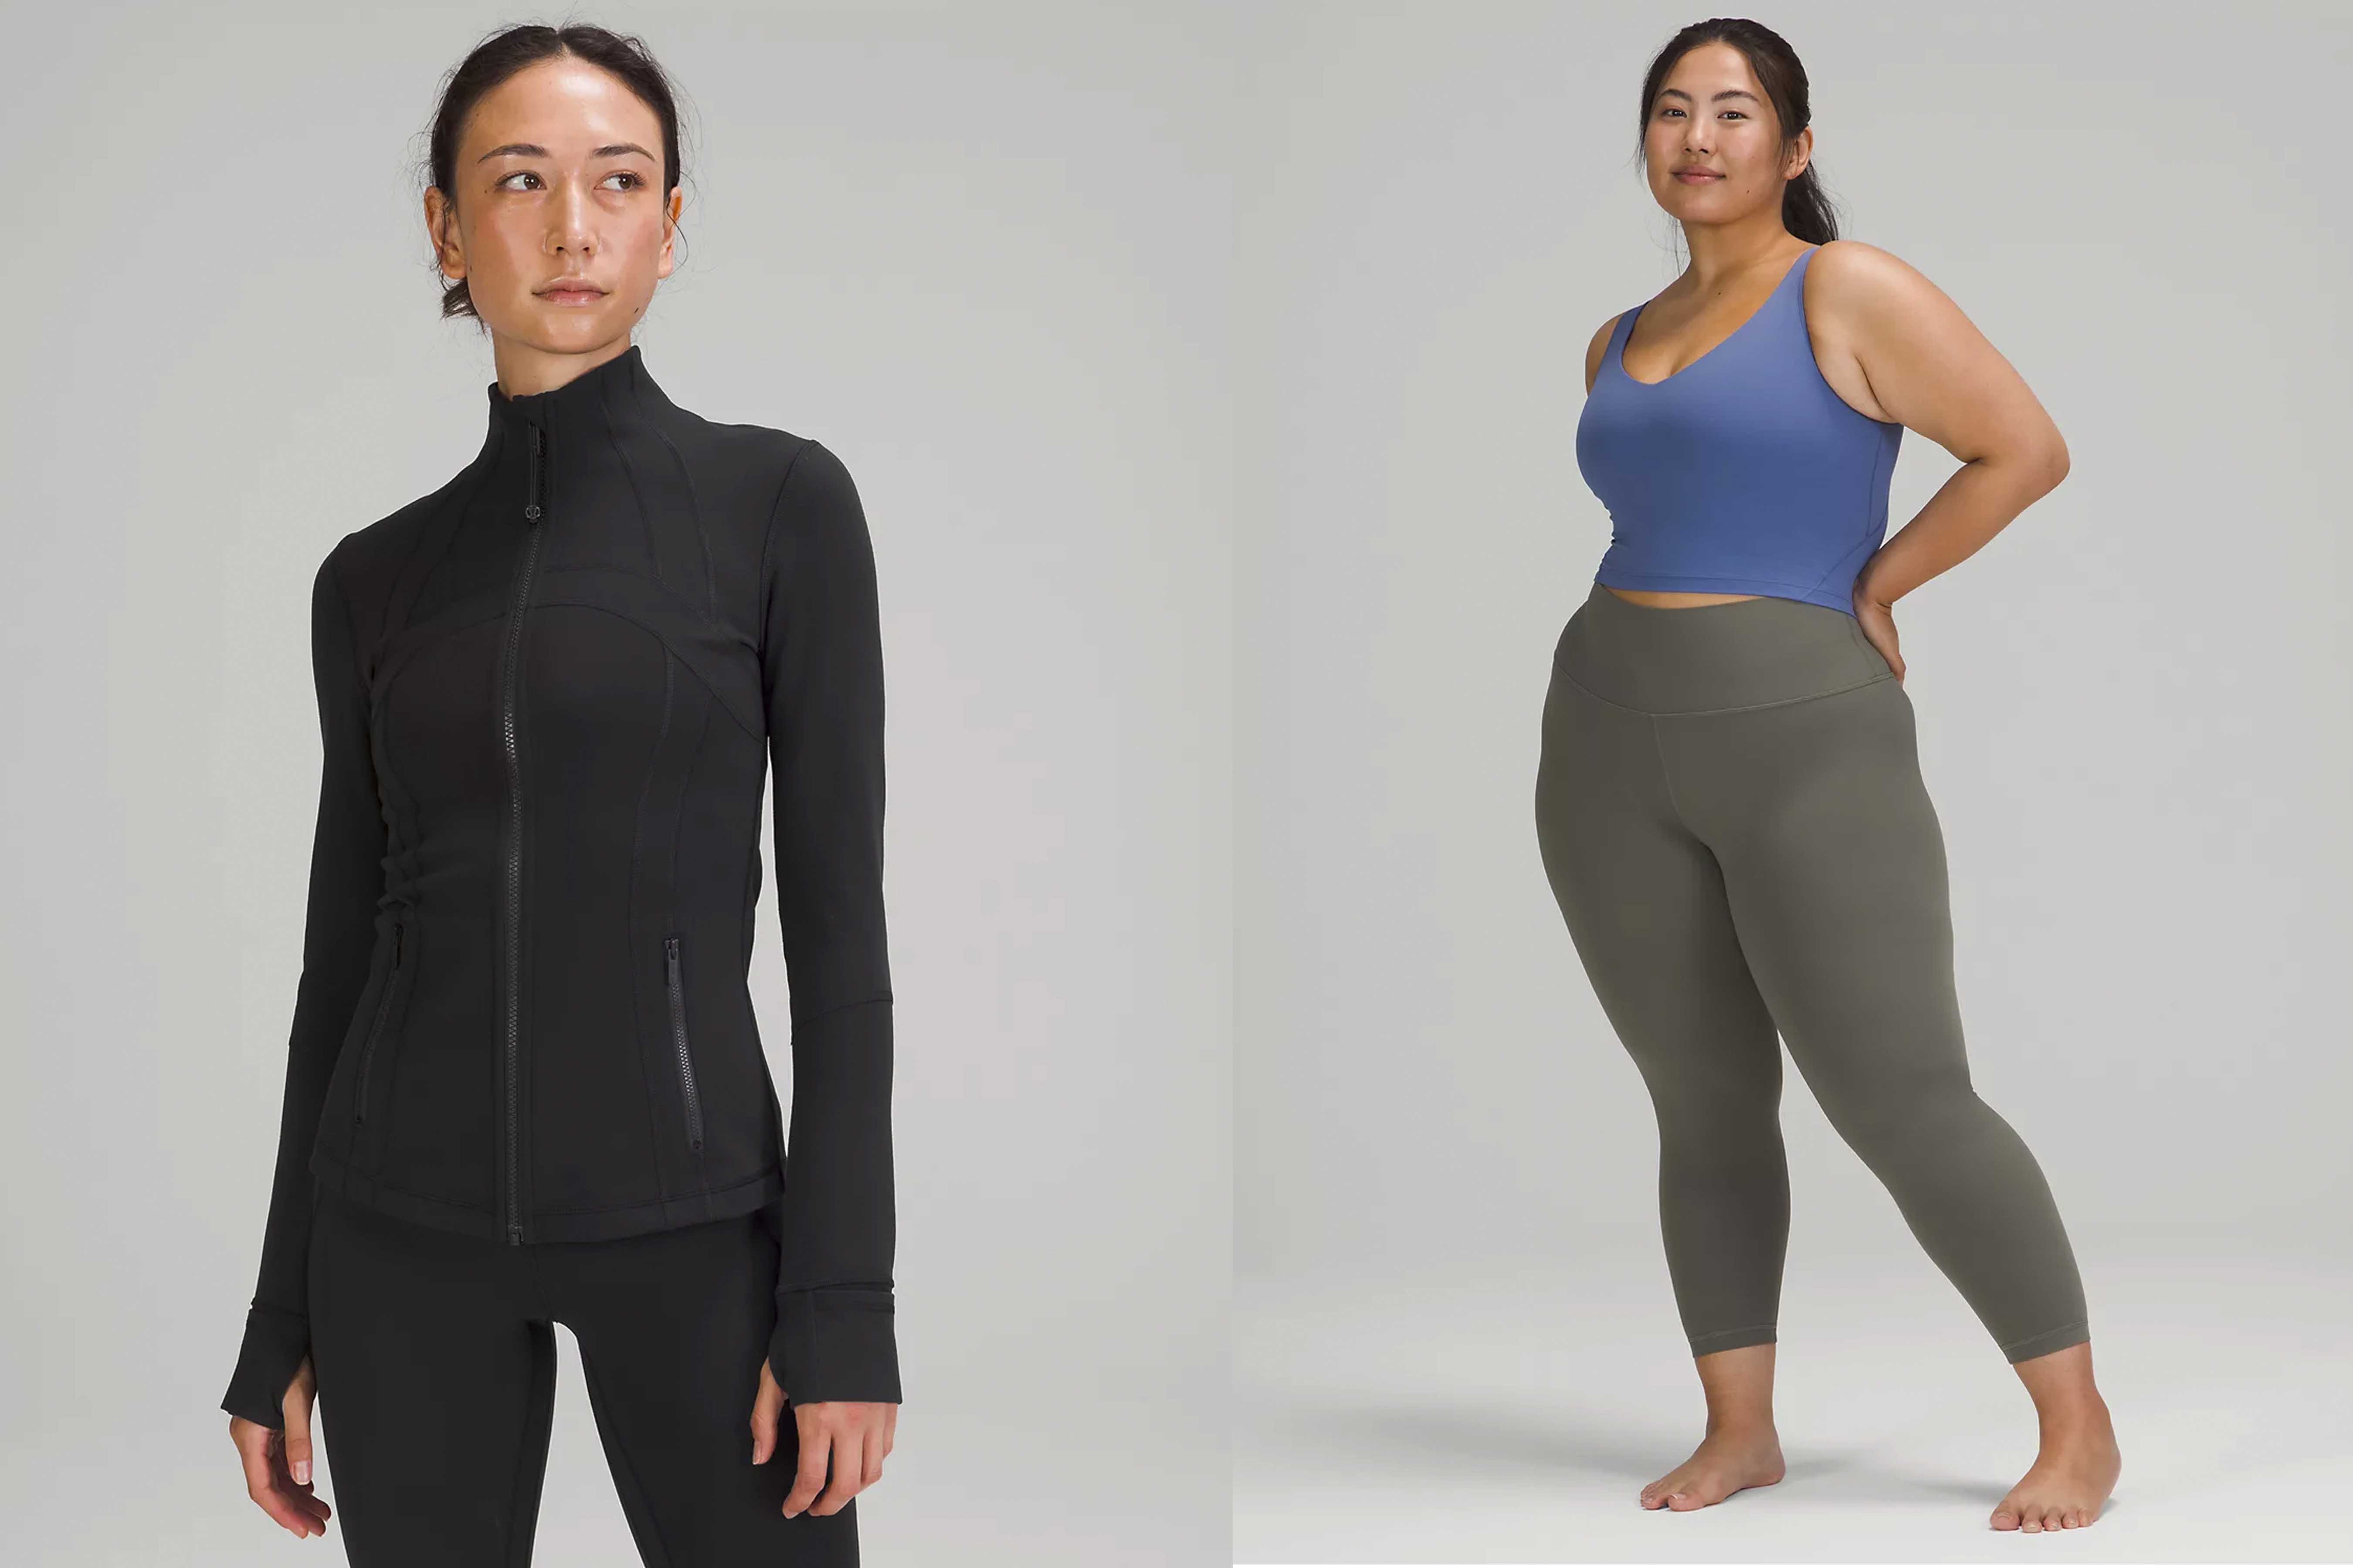 15 Women's Activewear Brands for High Performance Results